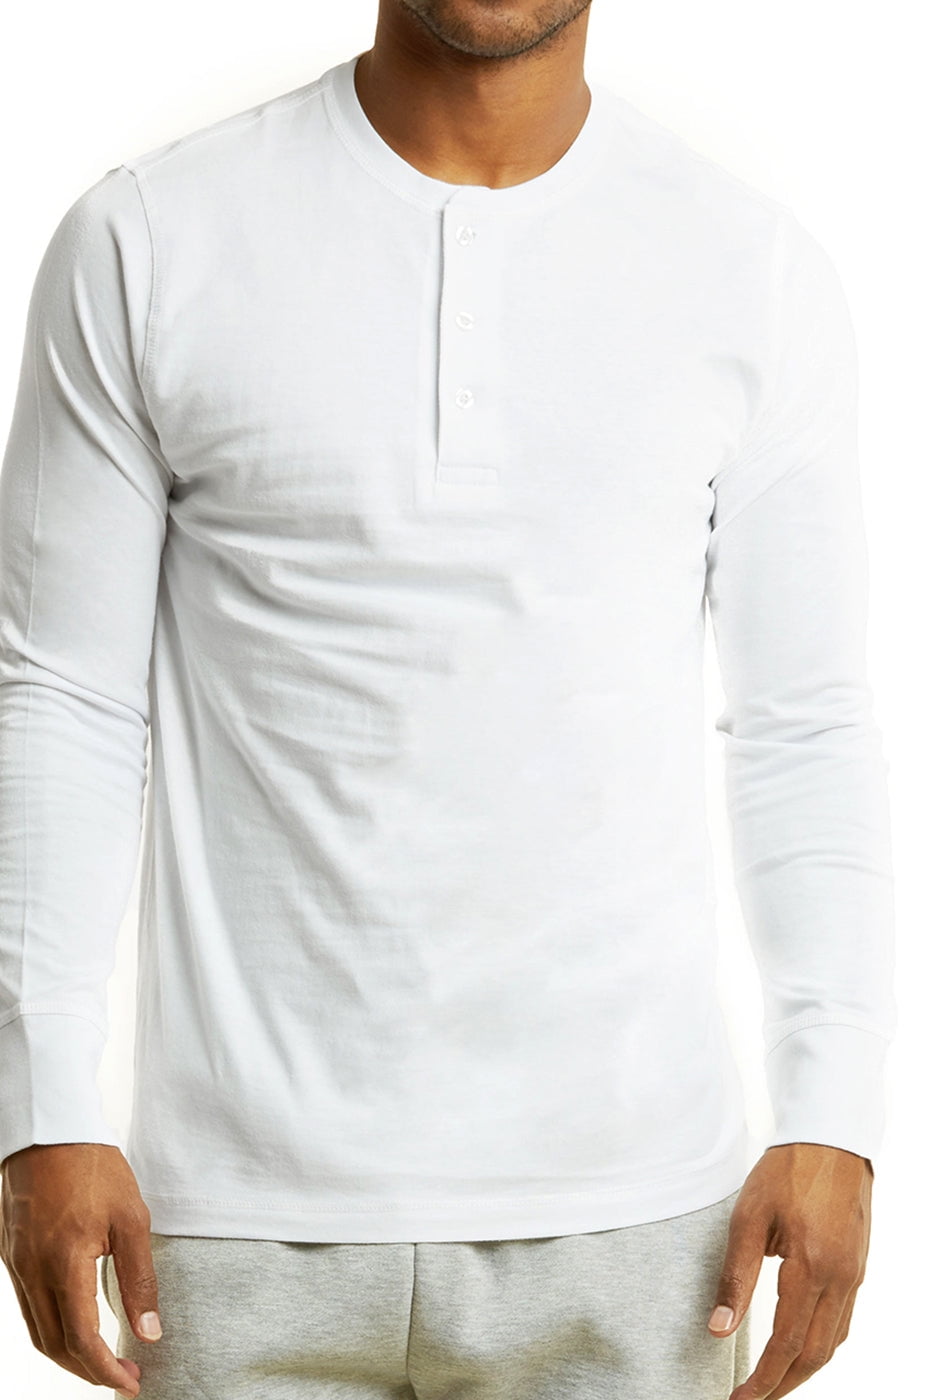 Knocker Men's Long Sleeve 3-Button Classic Athletic Henley Tee Shirts ...